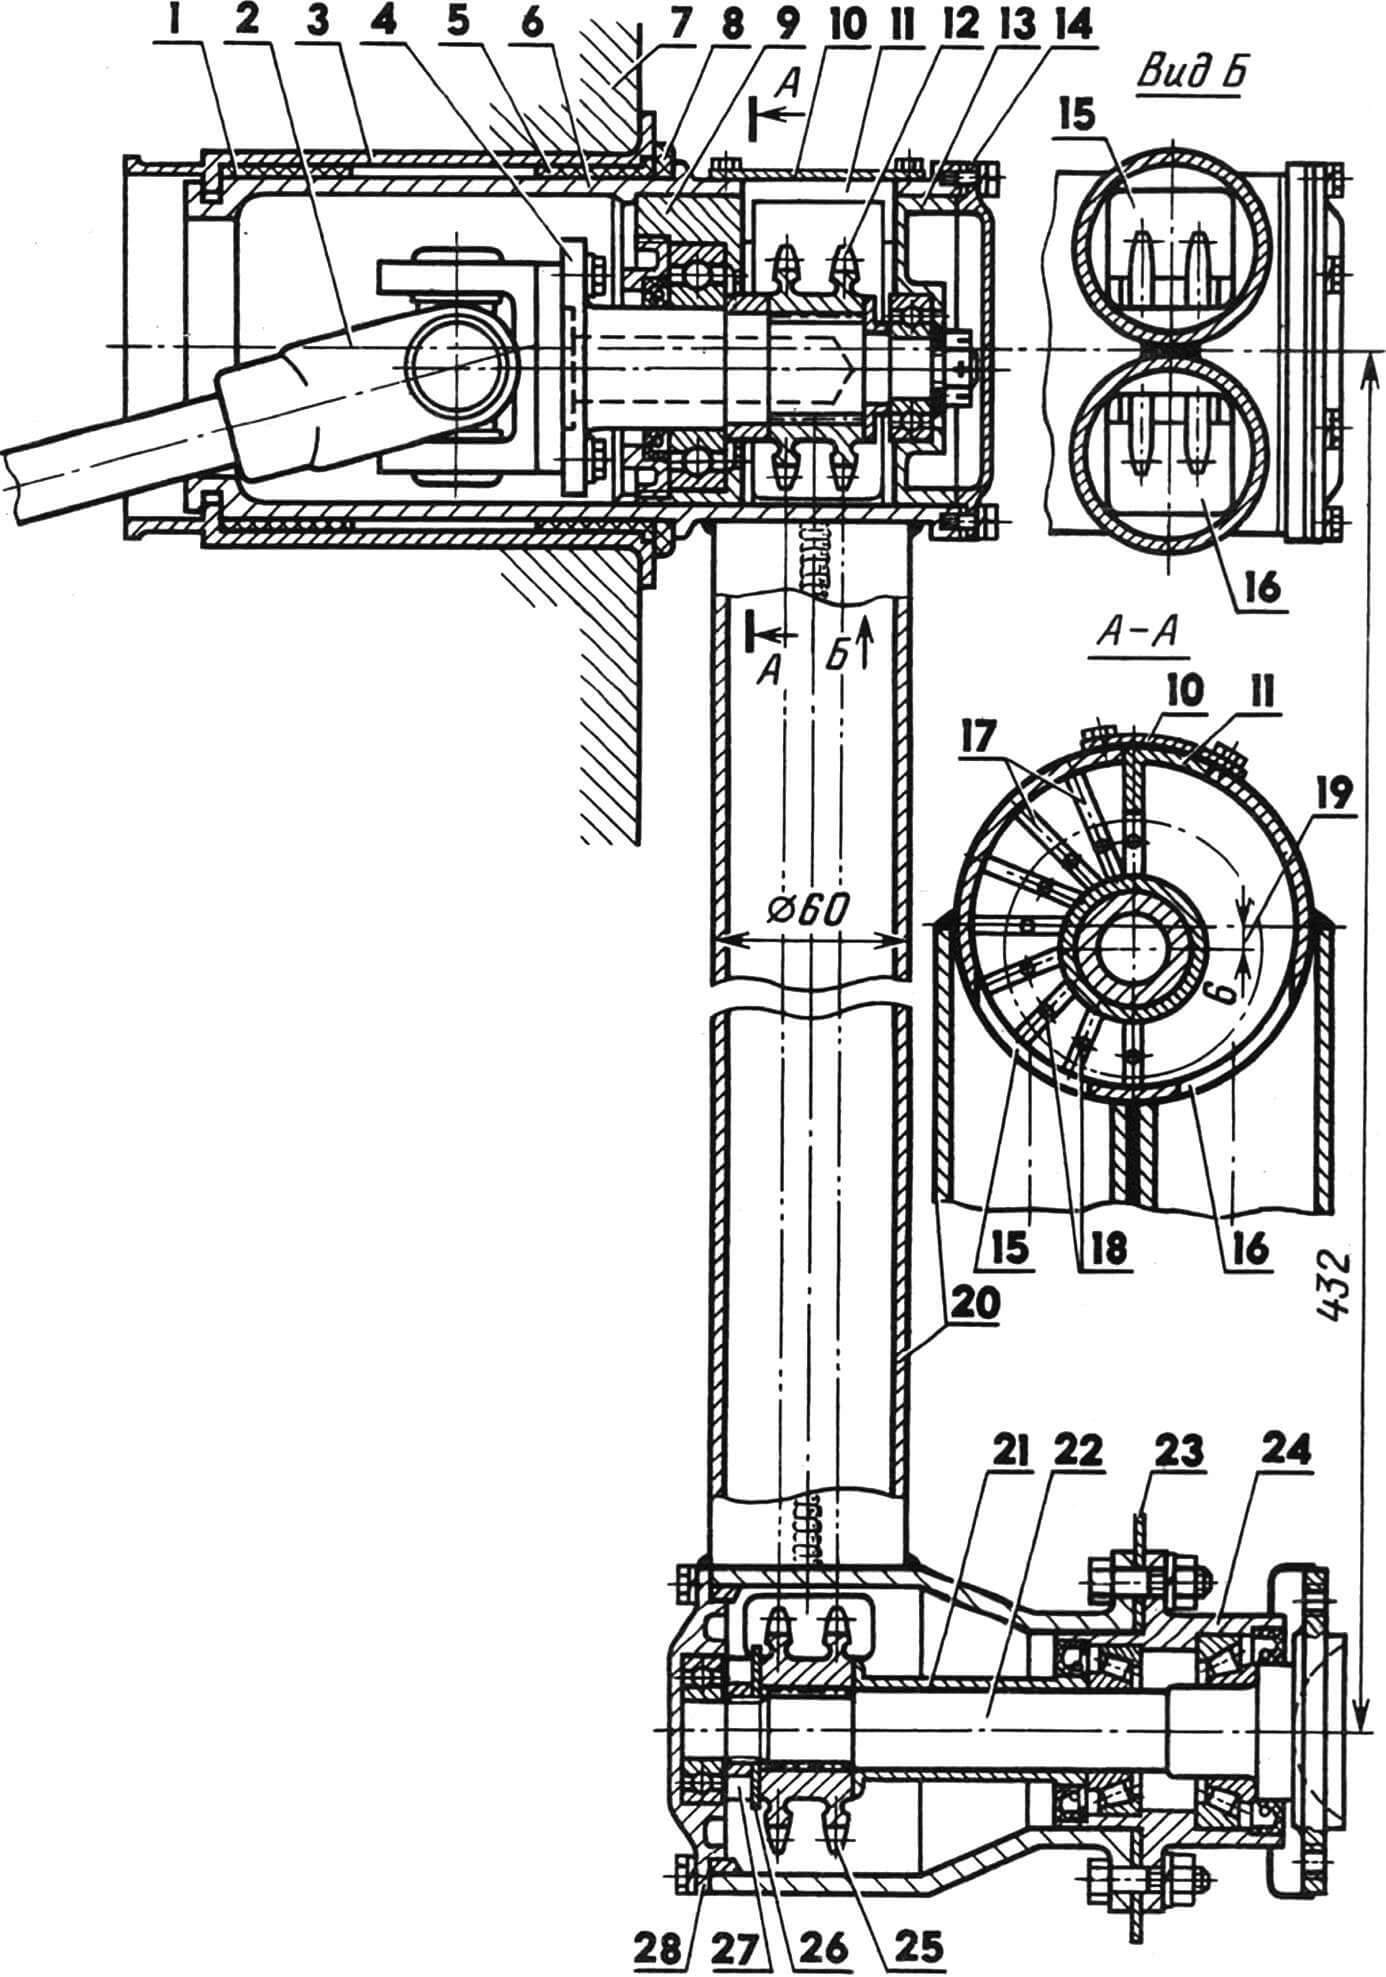 Transmission (drive chains are not conditionally shown)